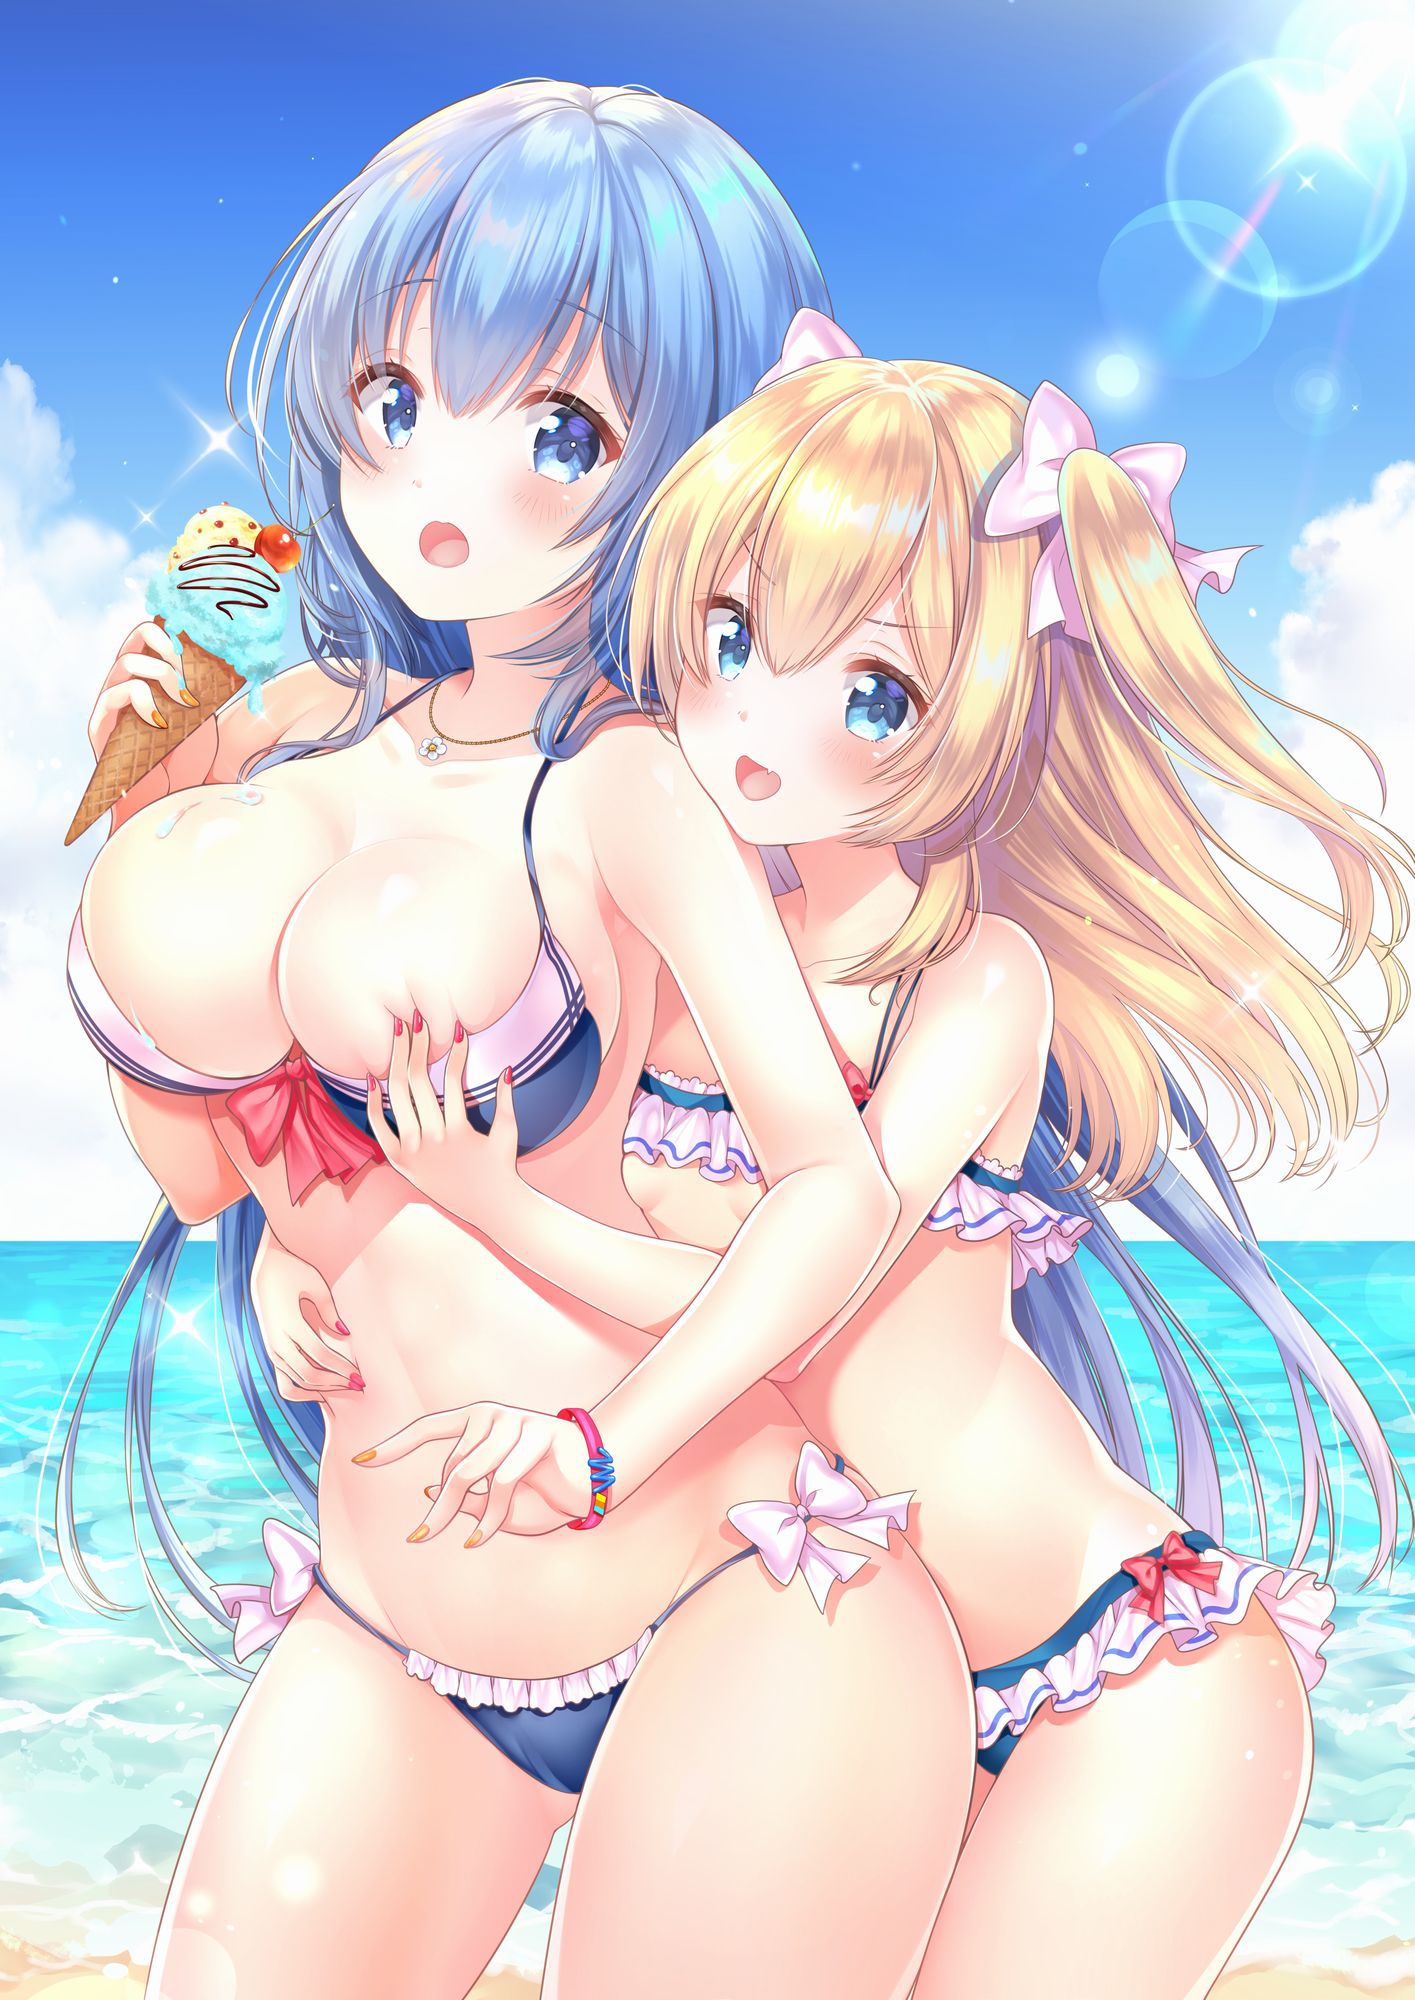 [secondary/ZIP] lovely yuri Lesbian image of a cute girl each other 19